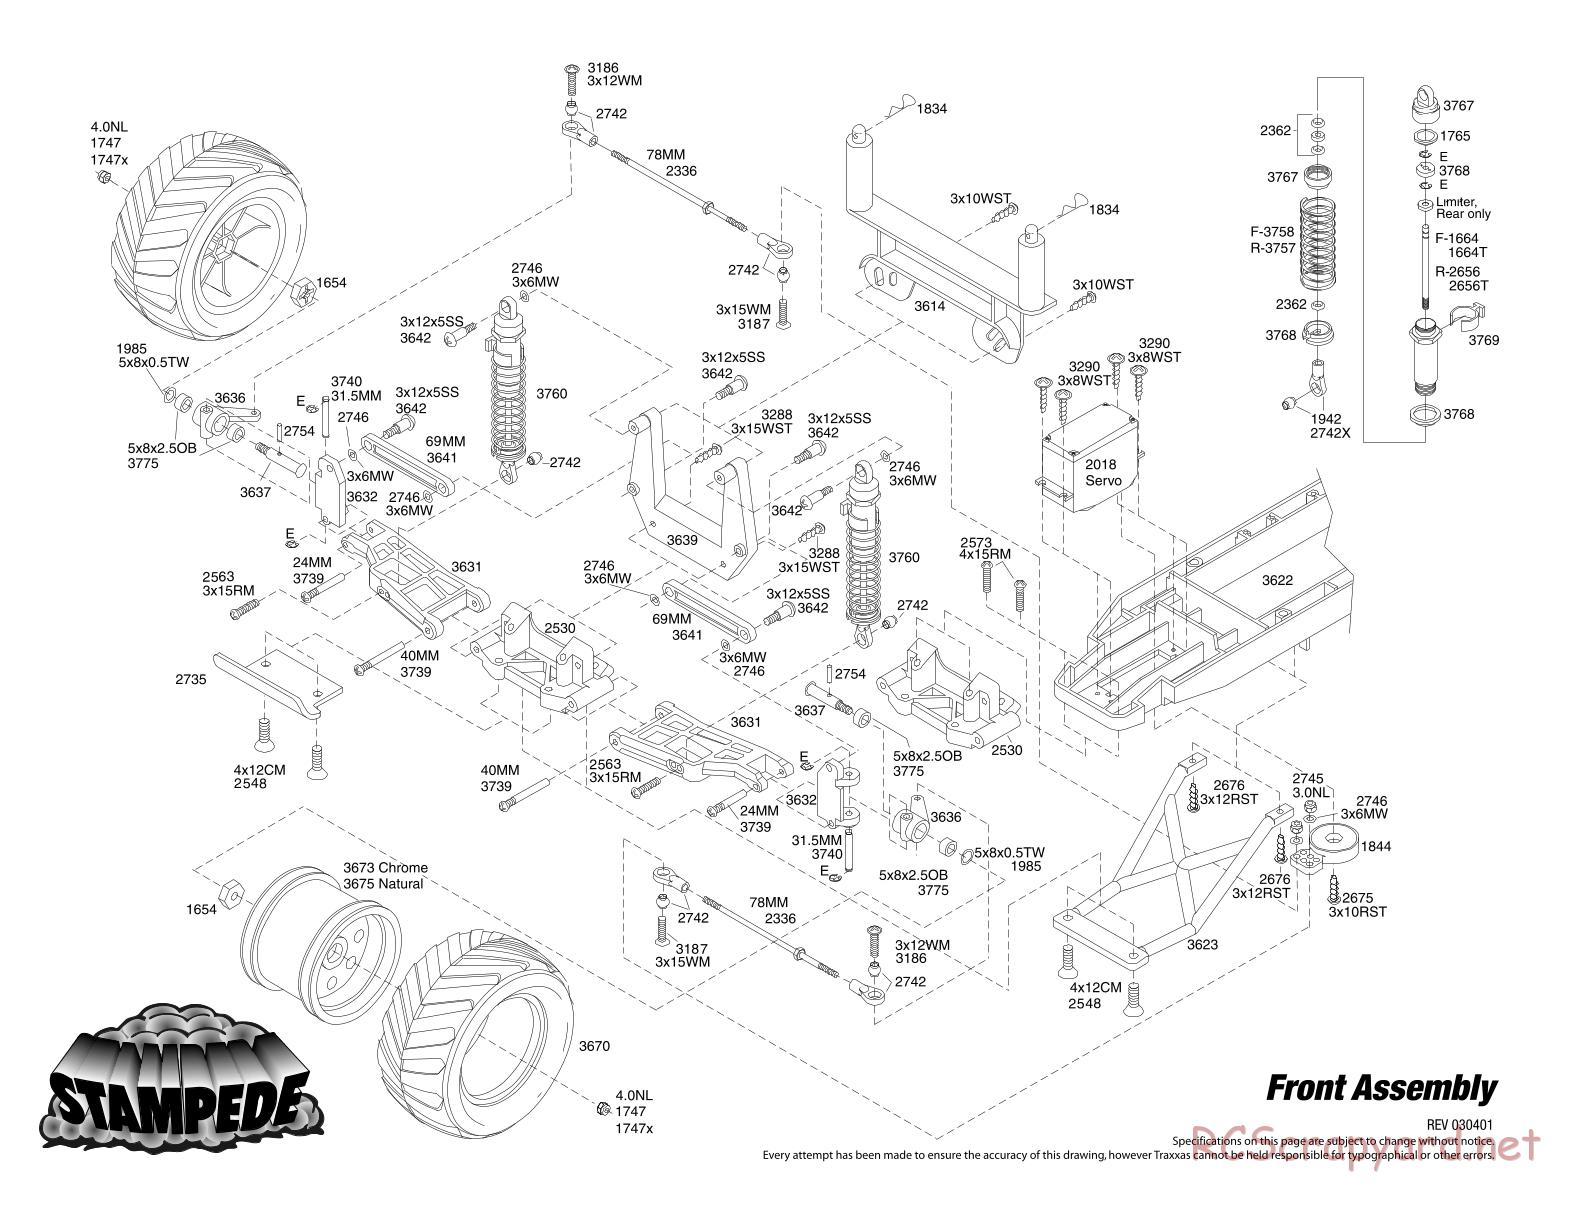 Traxxas - Stampede XL-1 - Exploded Views - Page 2